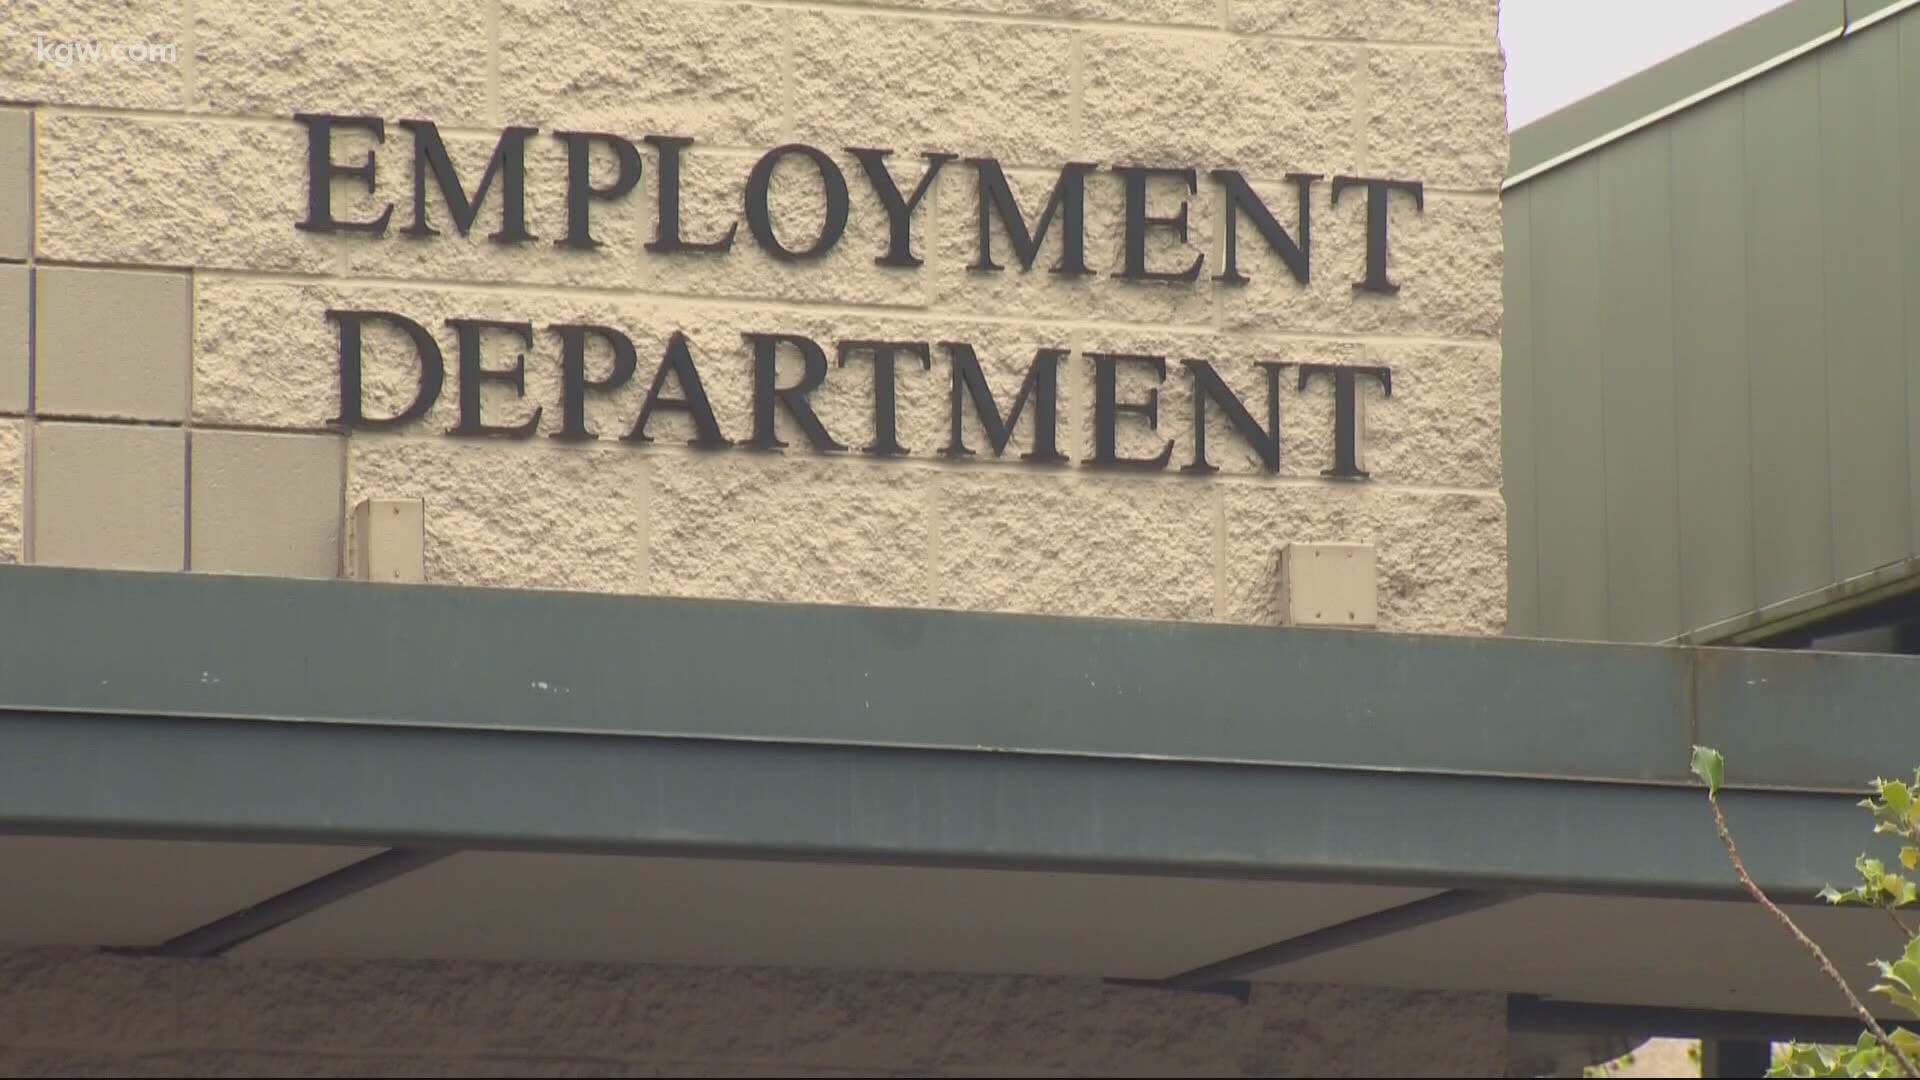 Thousands of Oregonians are still waiting on unemployment checks. On Saturday, state lawmakers grilled the heads of the Employment Department on the hold up.